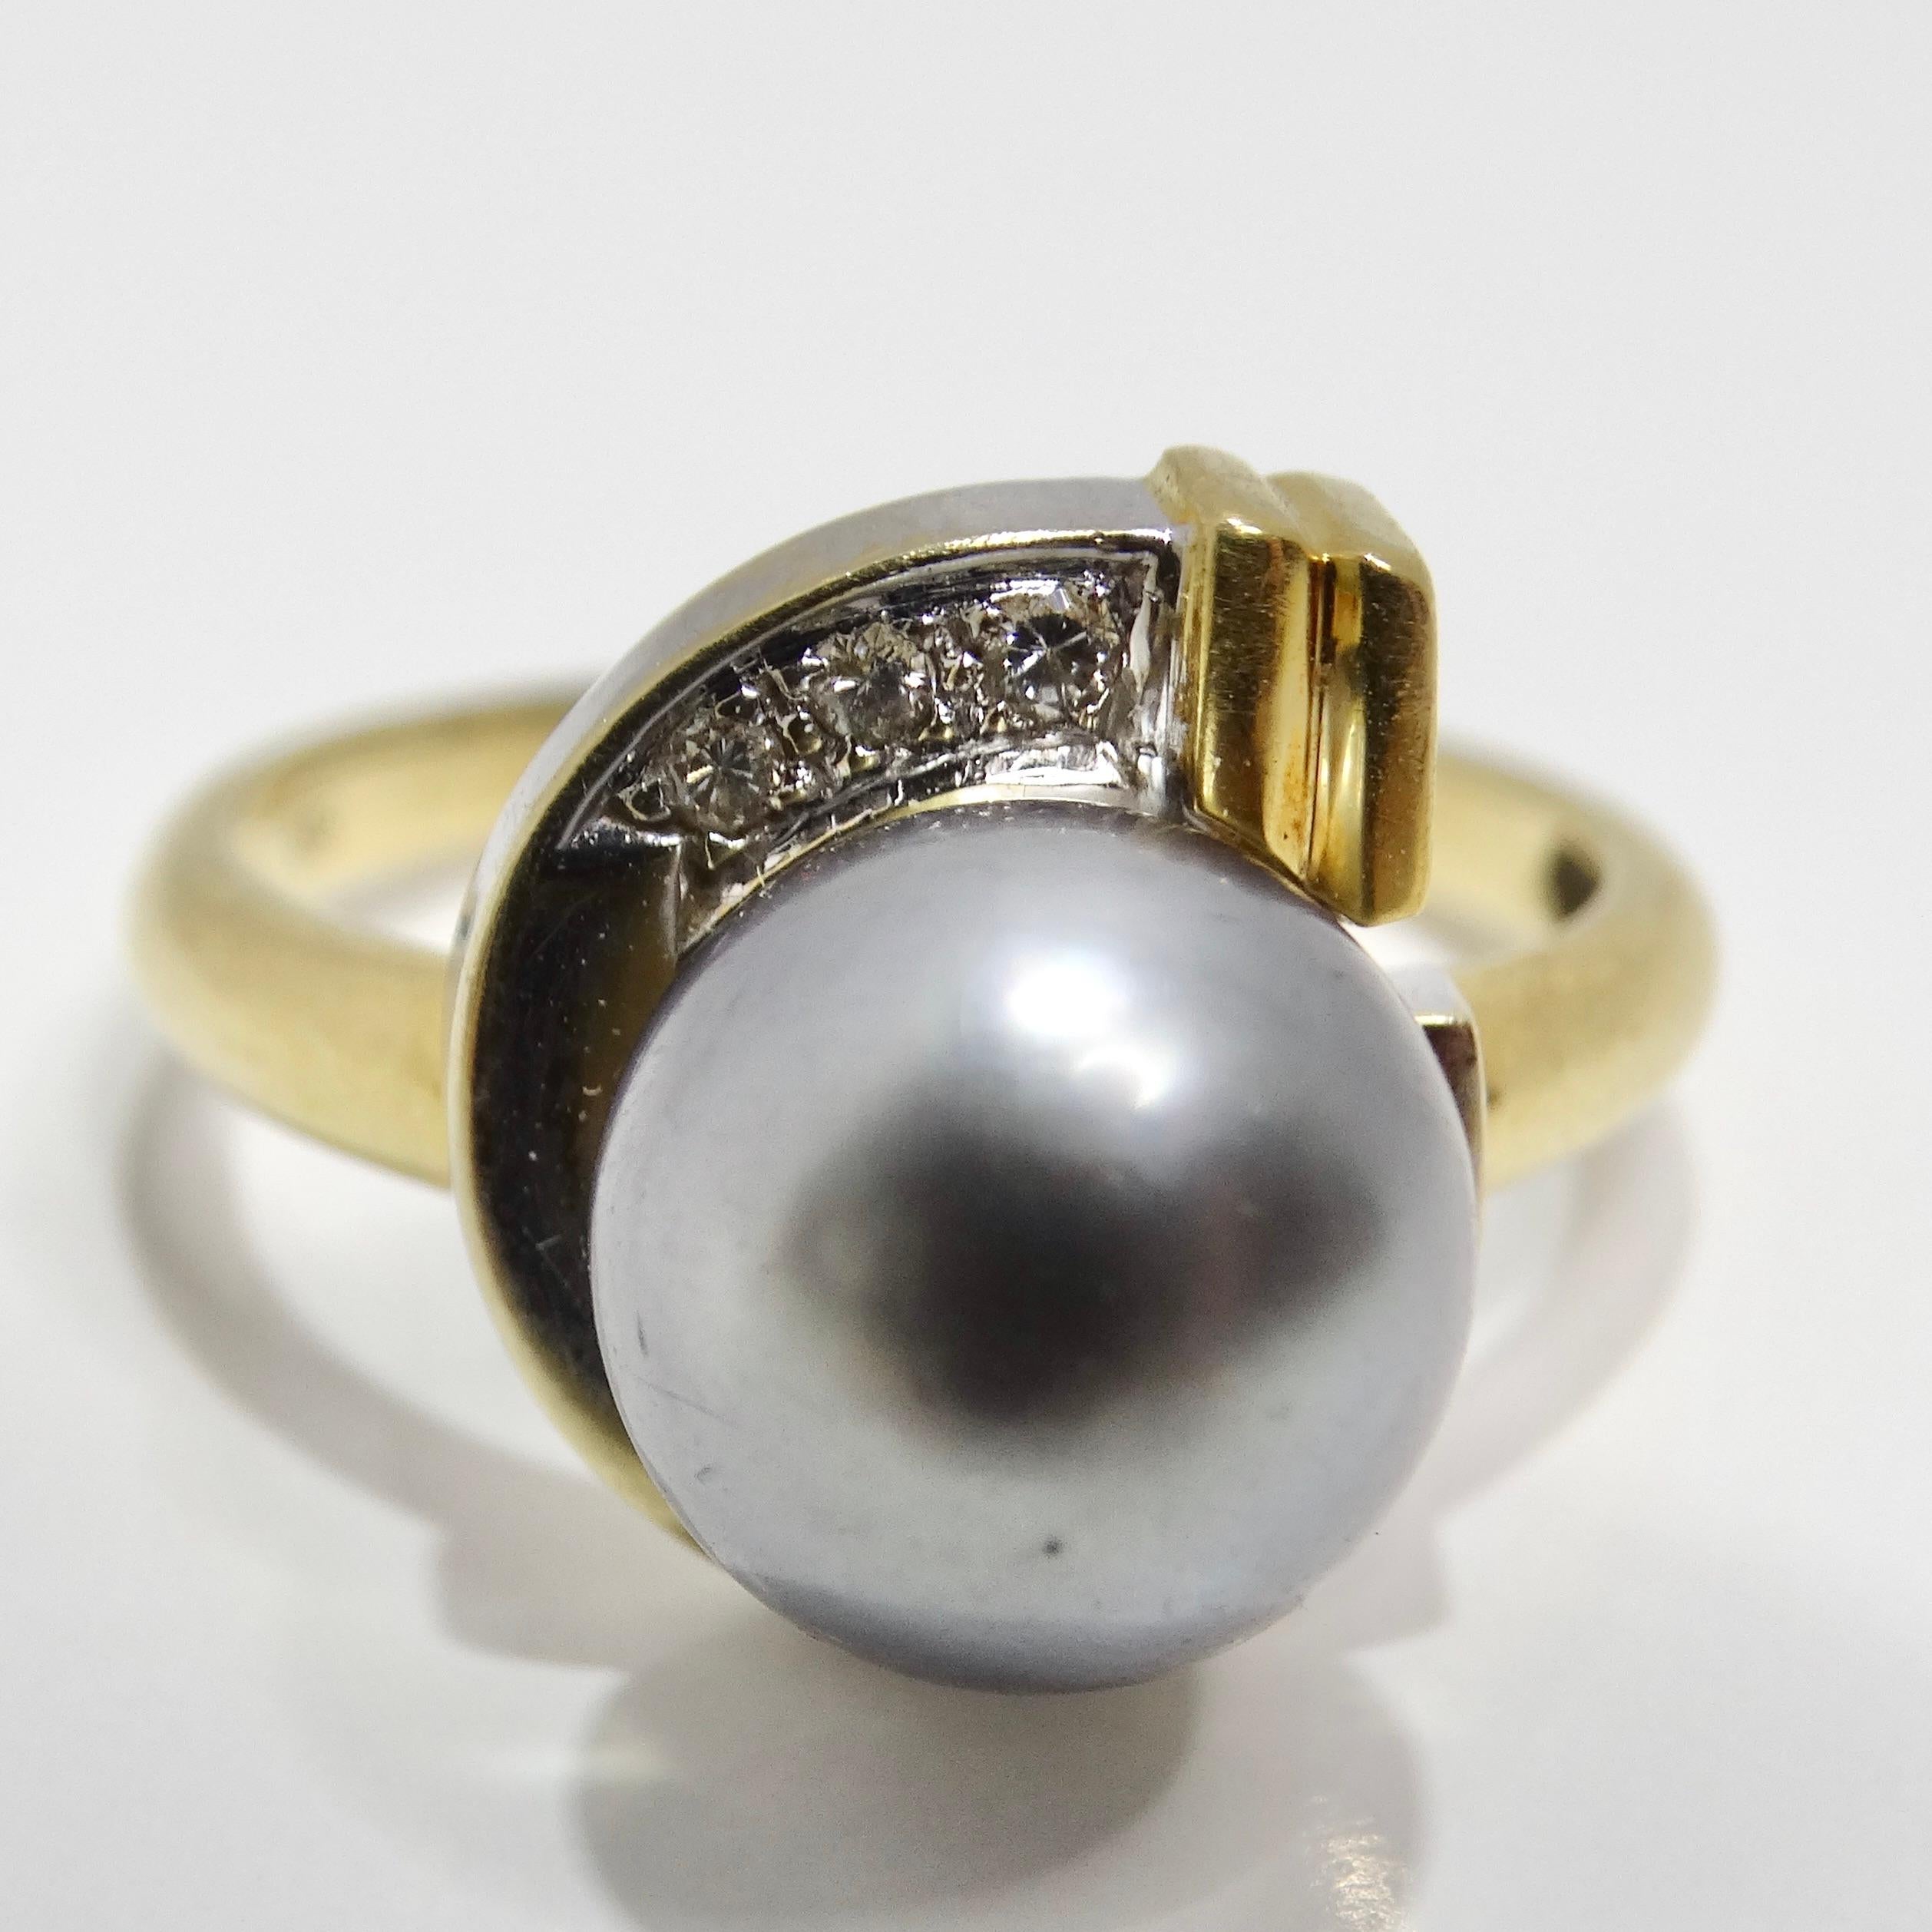 Introducing the extraordinary 18K Gold Black South Sea Pearl Diamond Ring, a truly unique and special piece that embodies elegance and sophistication. Crafted in 1970, this ring features a stunning black South Sea pearl set in two-tone yellow and